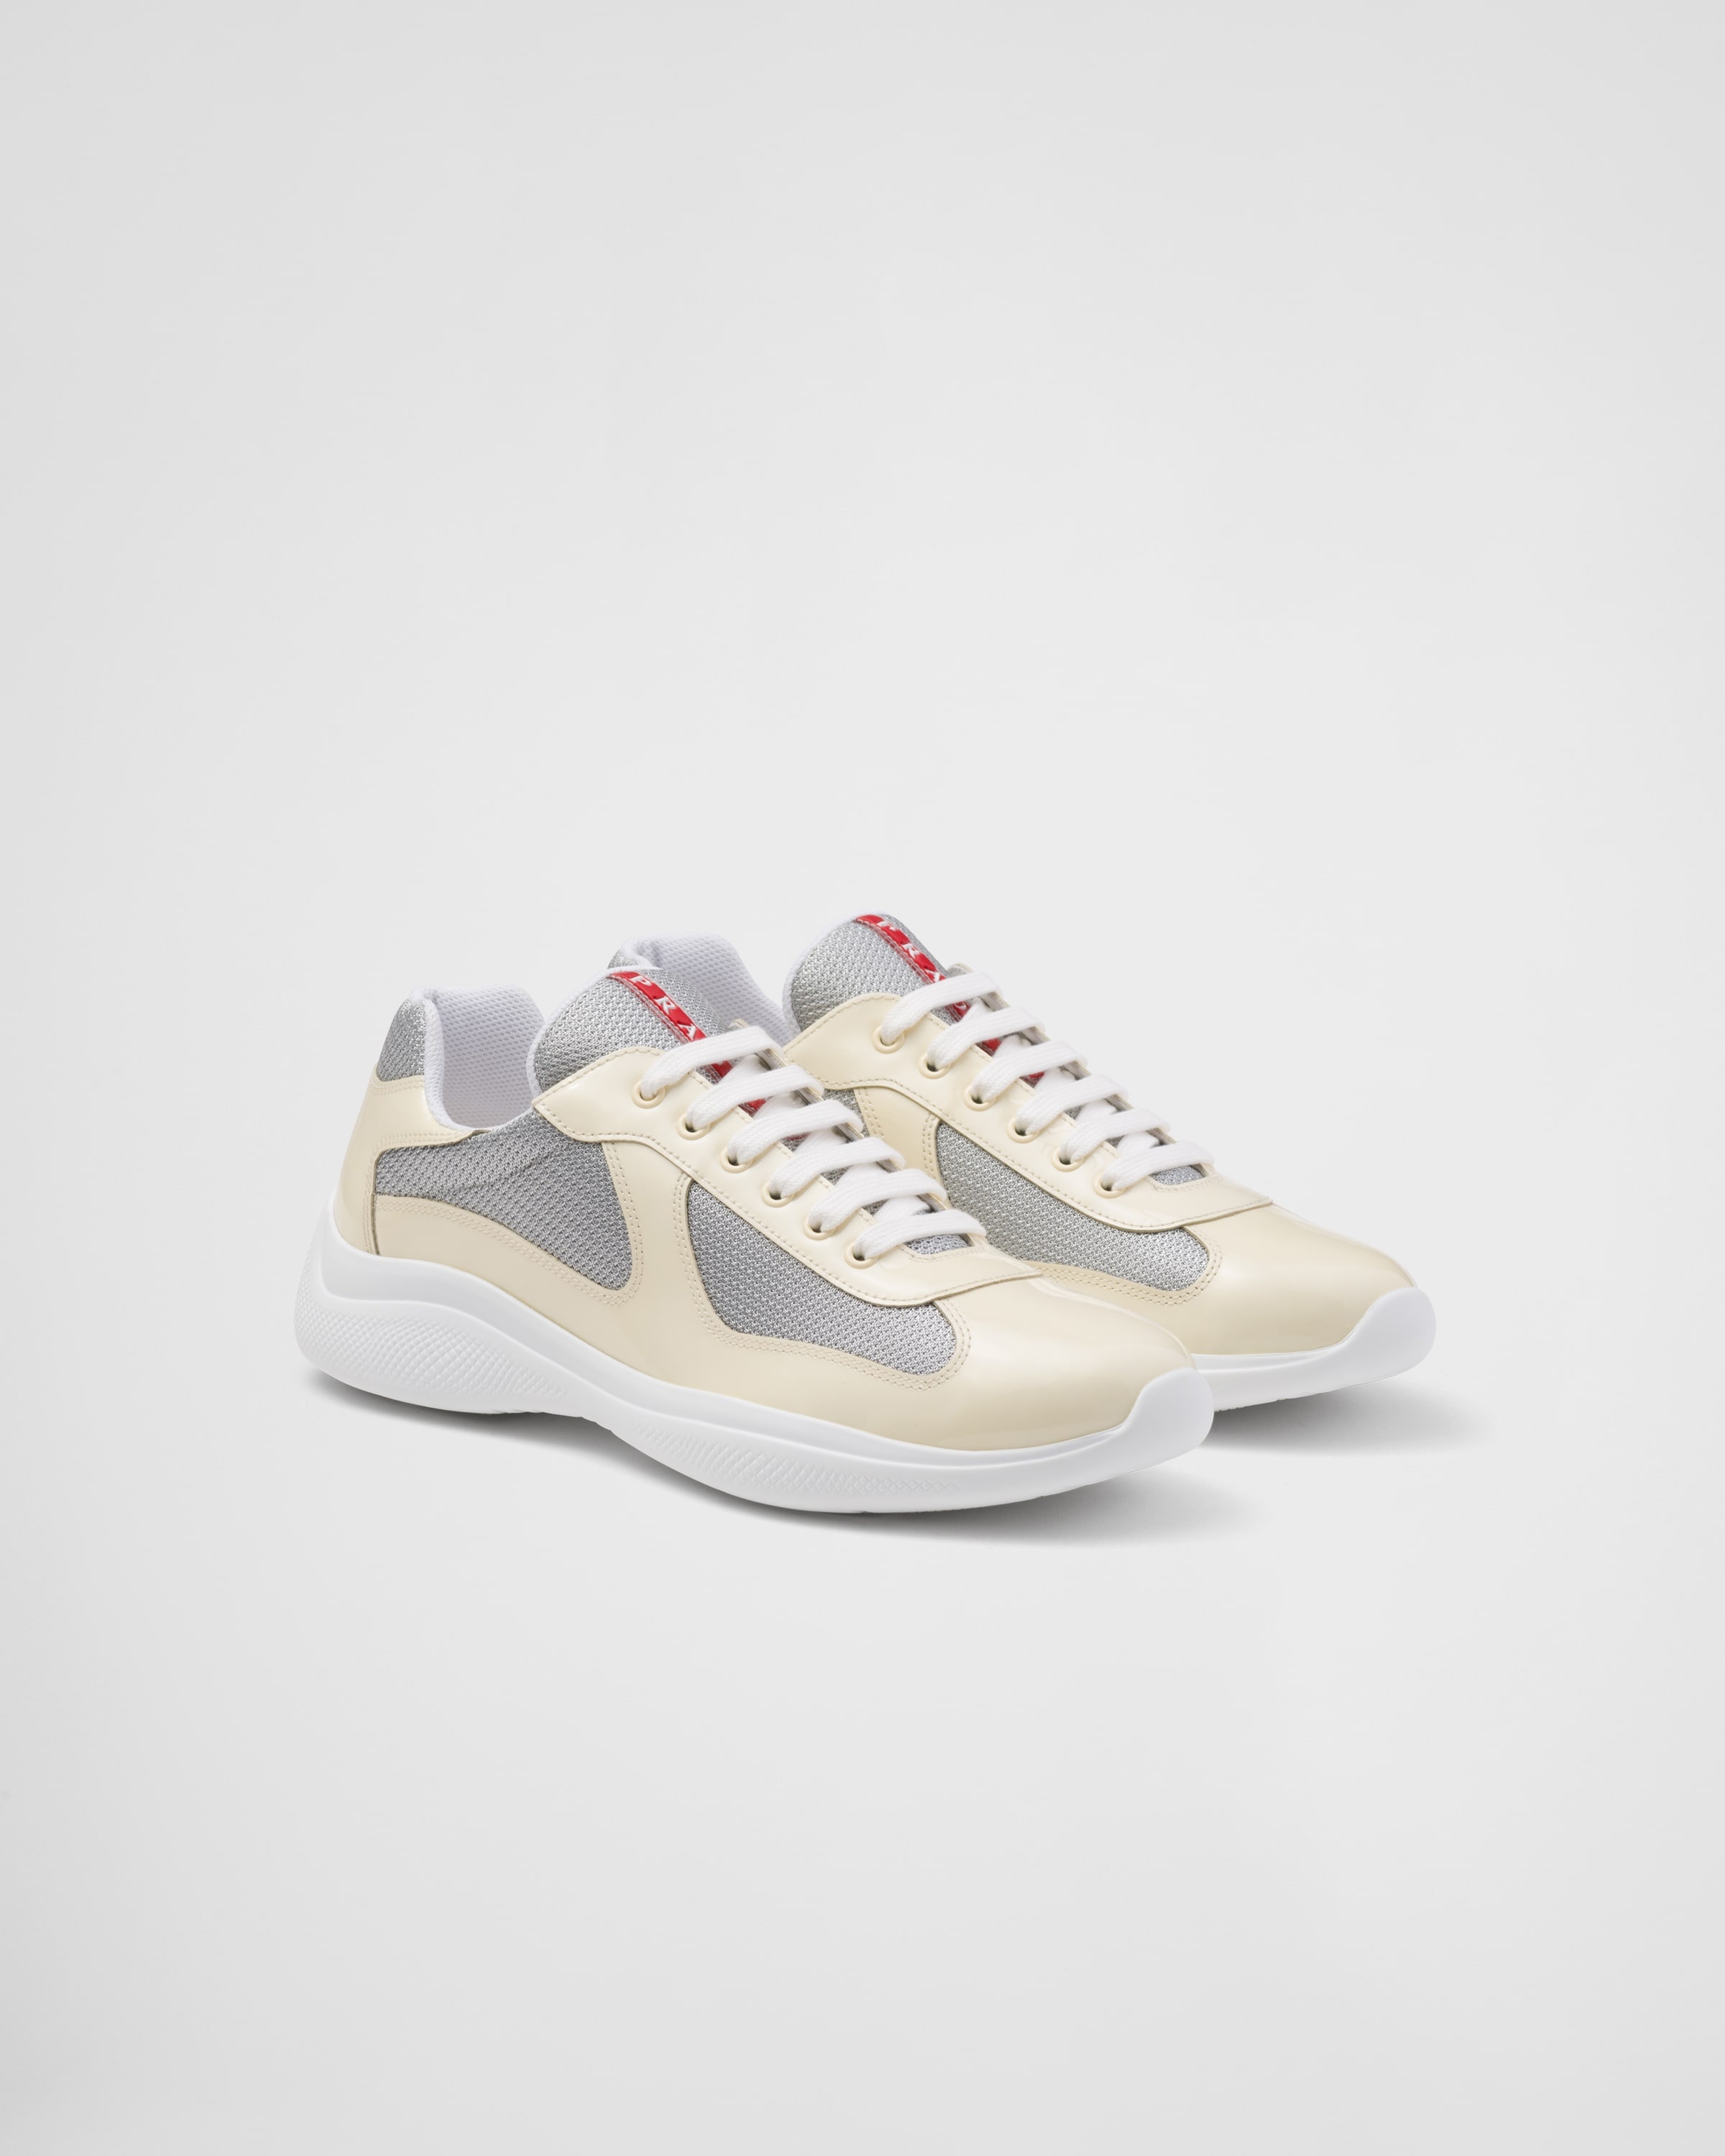 Prada America's Cup patent leather and bike fabric sneakers - 1